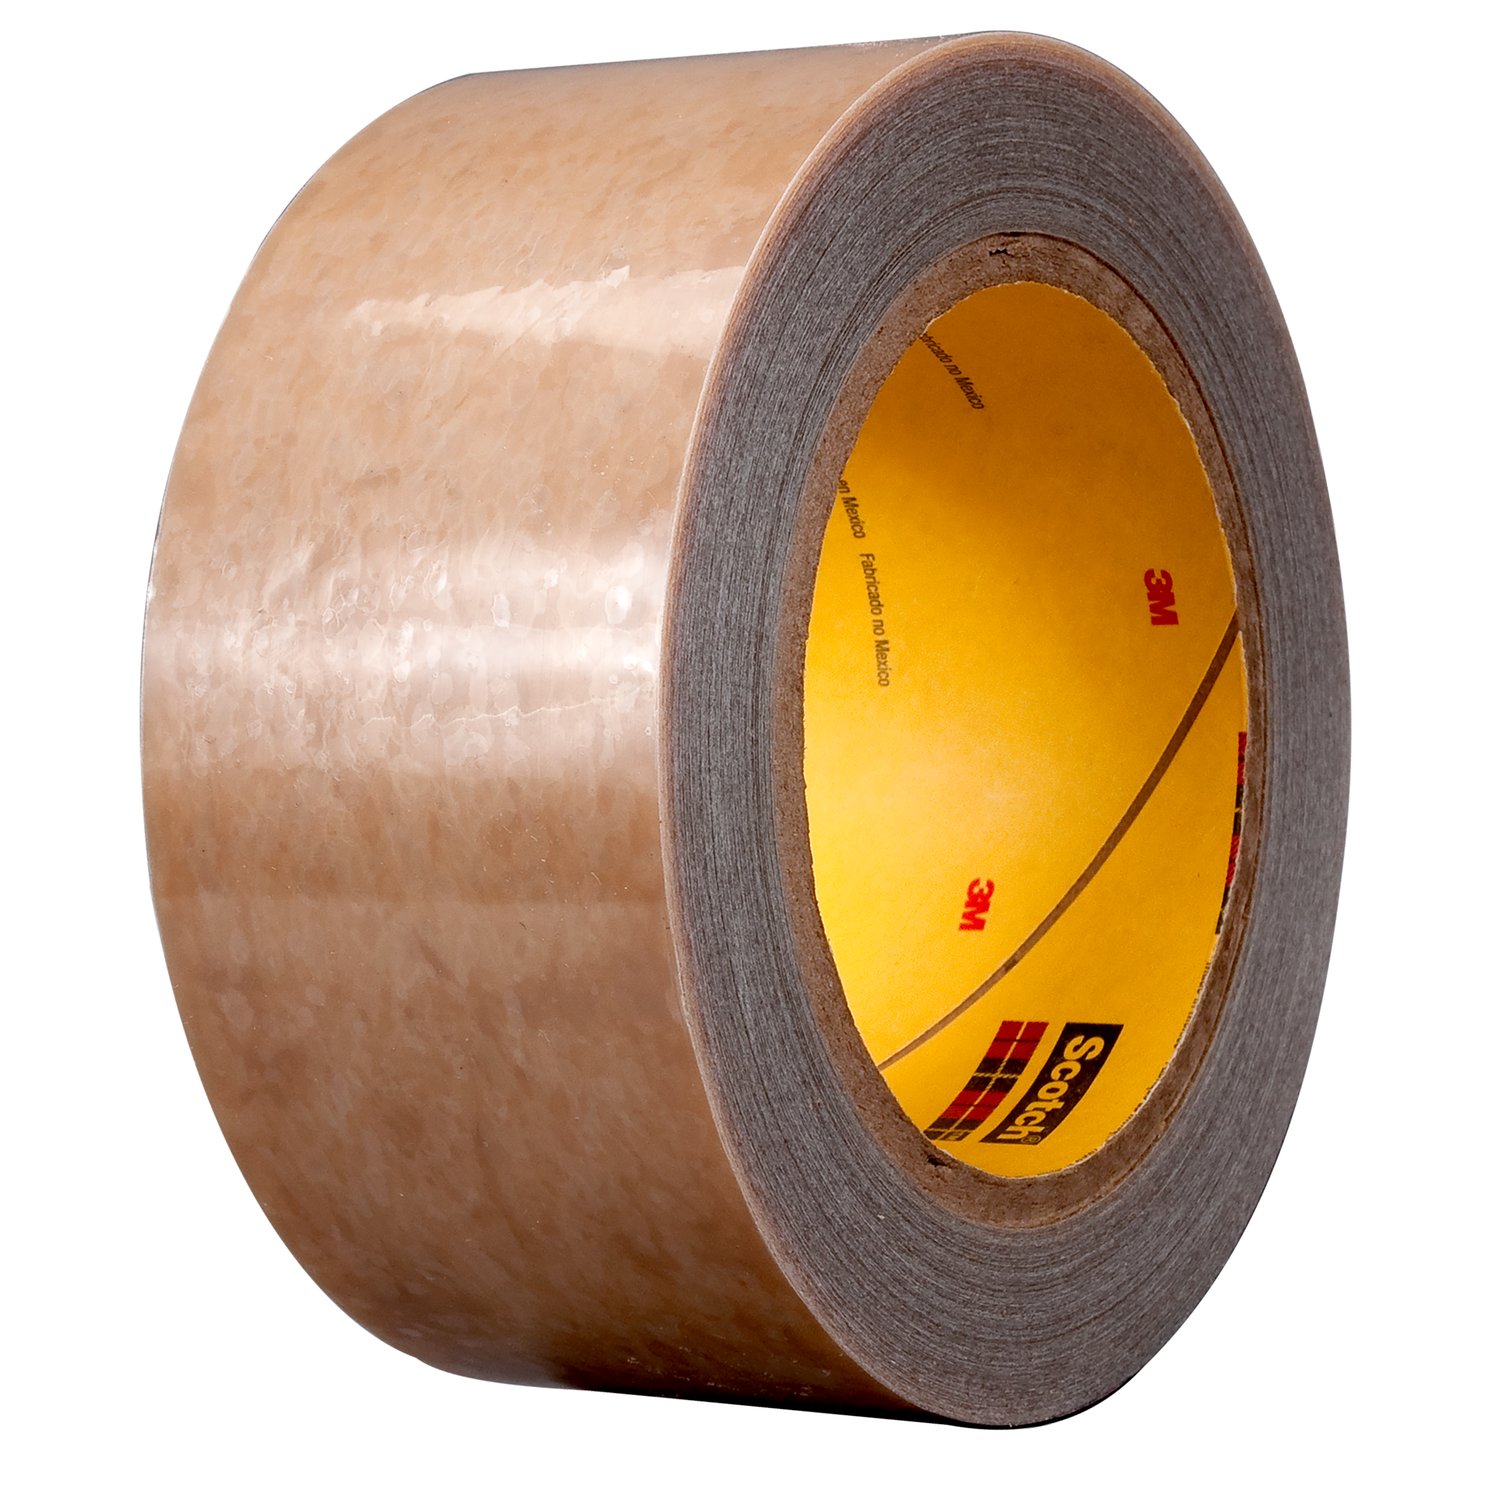 7010045187 - 3M Polyester Protective Tape 336, Transparent, 48 in x 144 yd, 1.5 mil, 1 roll per case